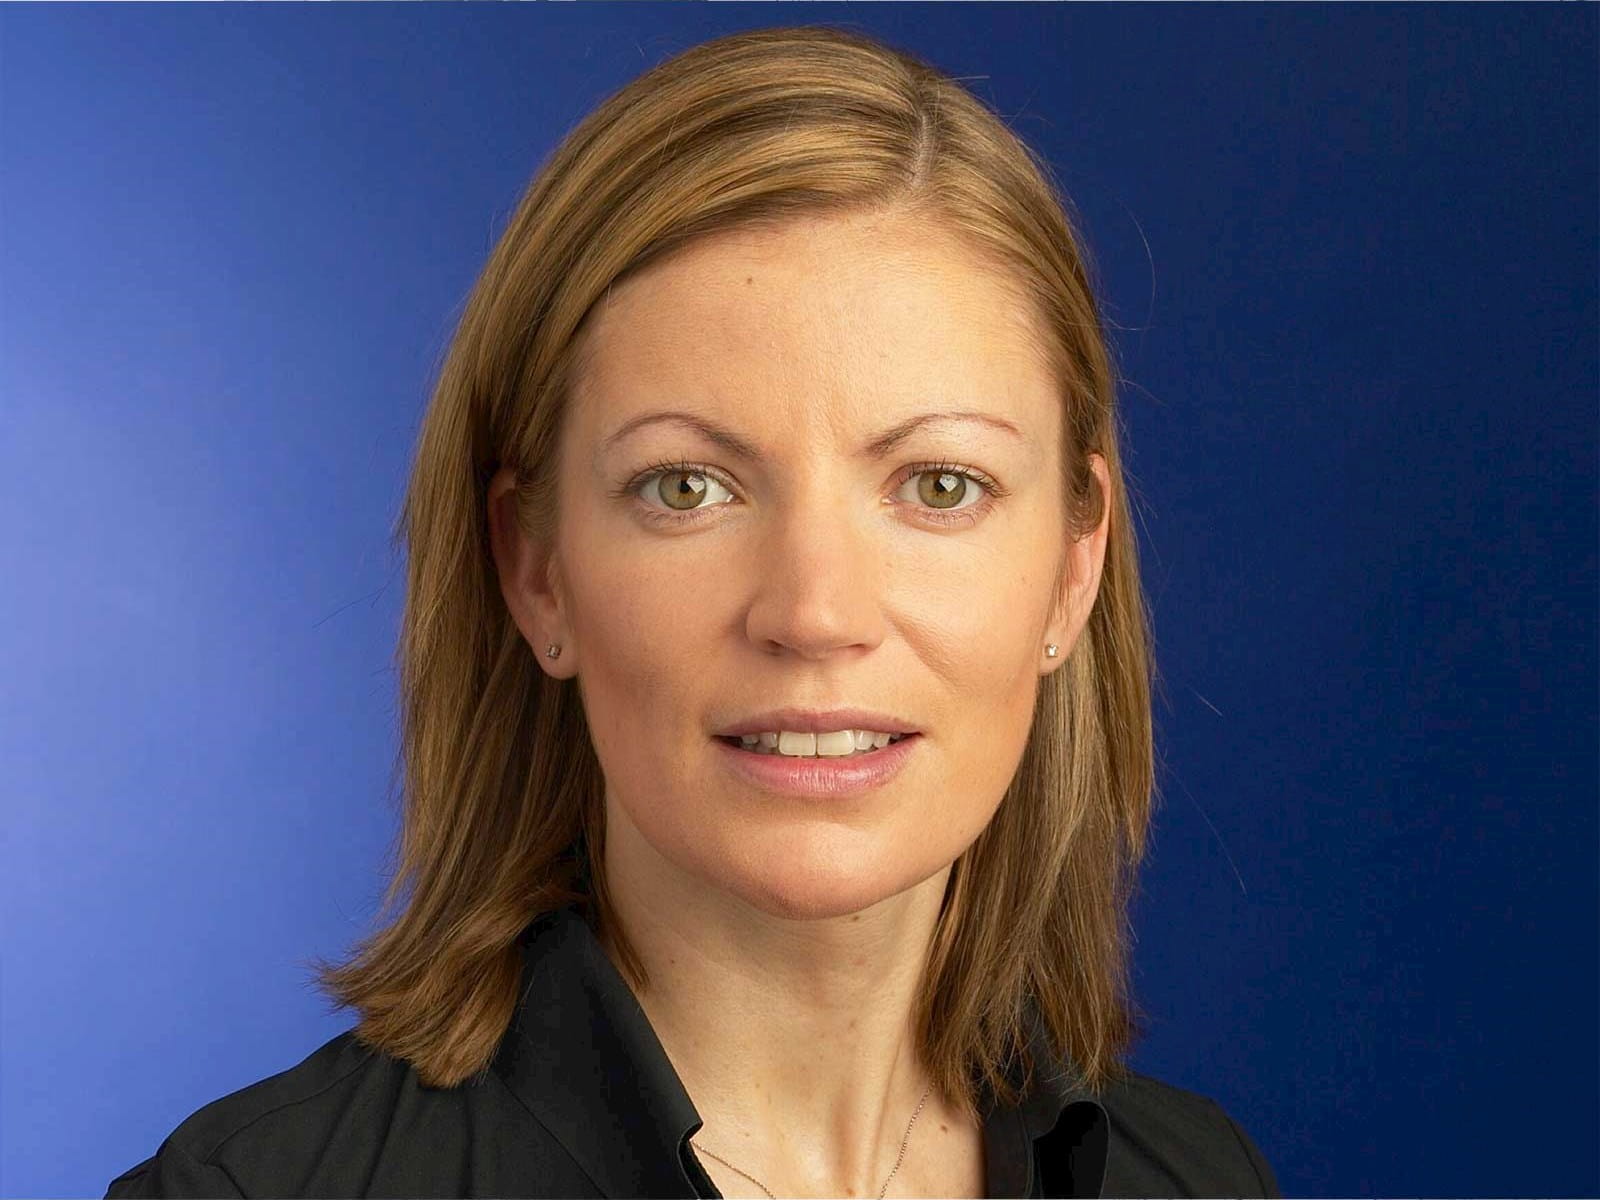 Nicola Longfield HEAD OF DEAL ADVISORY TRANSACTION SERVICES AT KPMG, AND GLOBAL DEAL ADVISORY CONSUMER AND RETAIL LEAD AT KPMG INTERNATIONAL ICAEW Corporate Finance Faculty